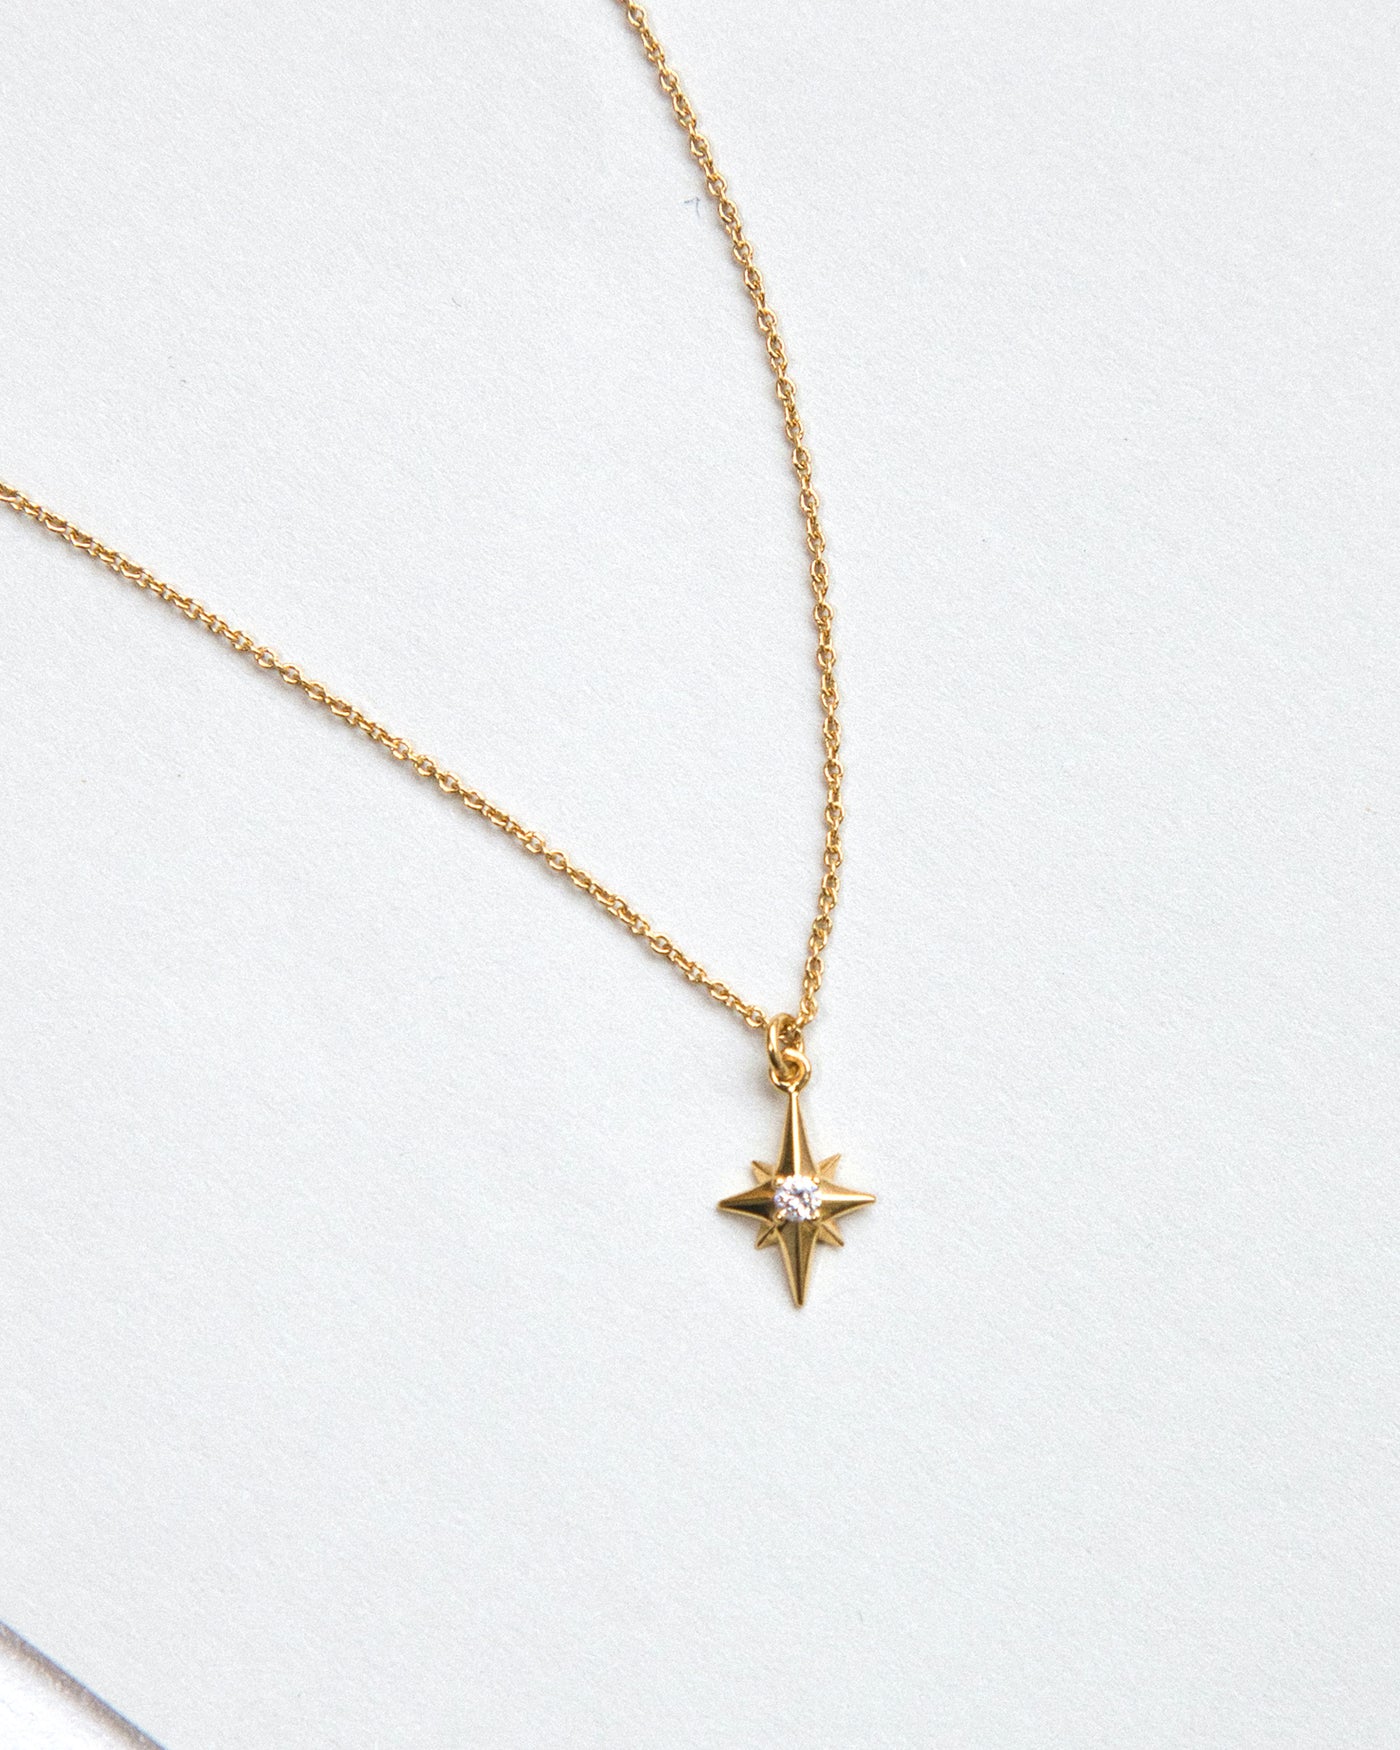 North Star Diamond Necklace - 14k Yellow Gold – EDGE of EMBER